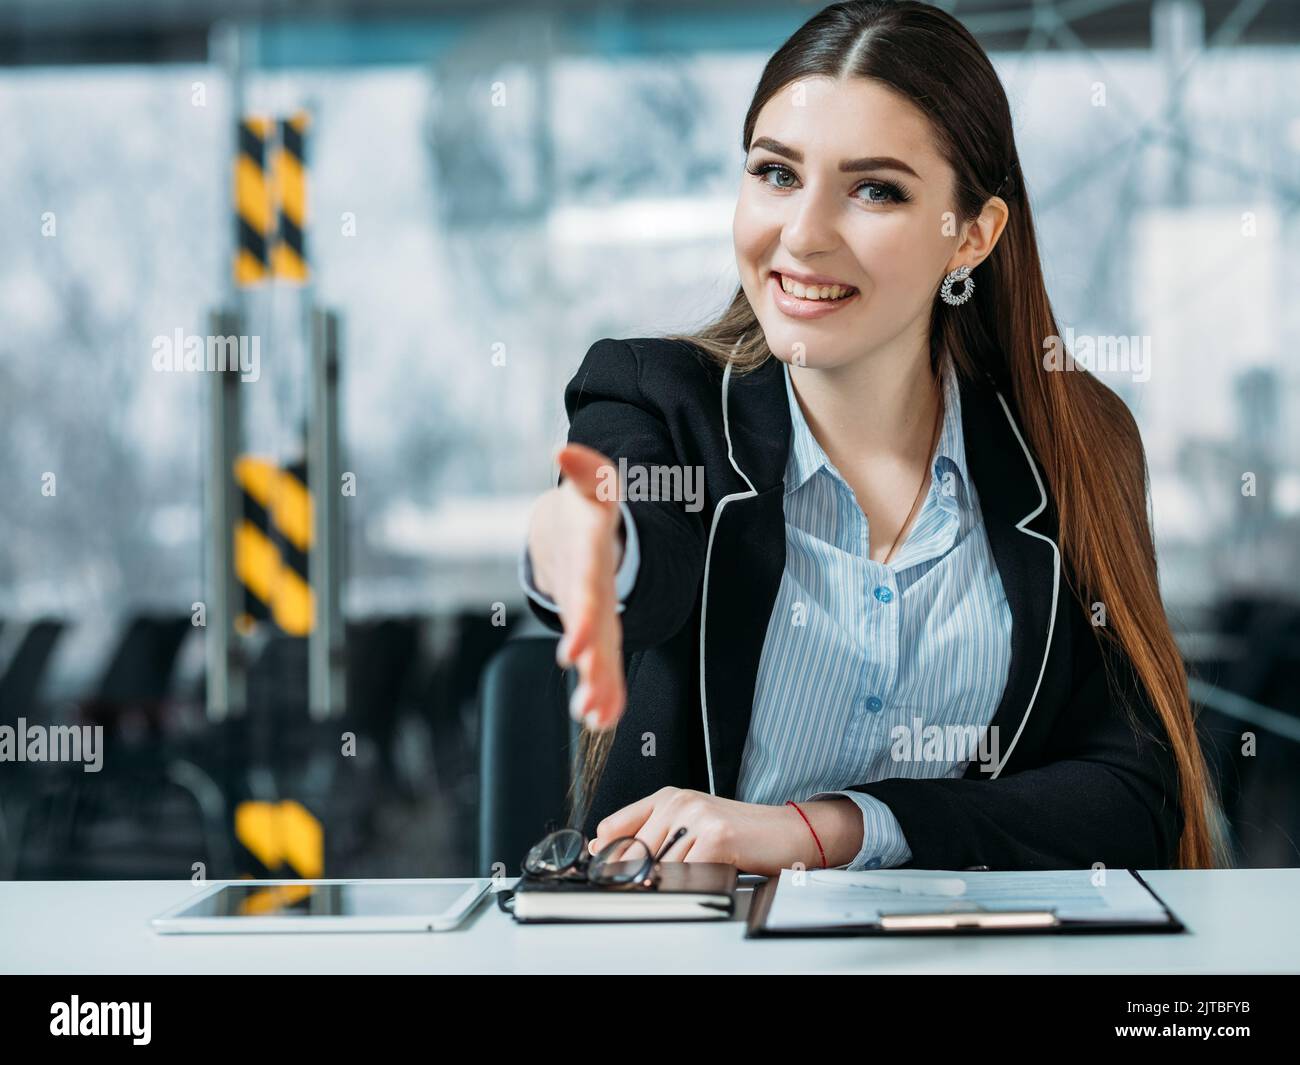 friendly hr portrait smiling intern welcoming hand Stock Photo